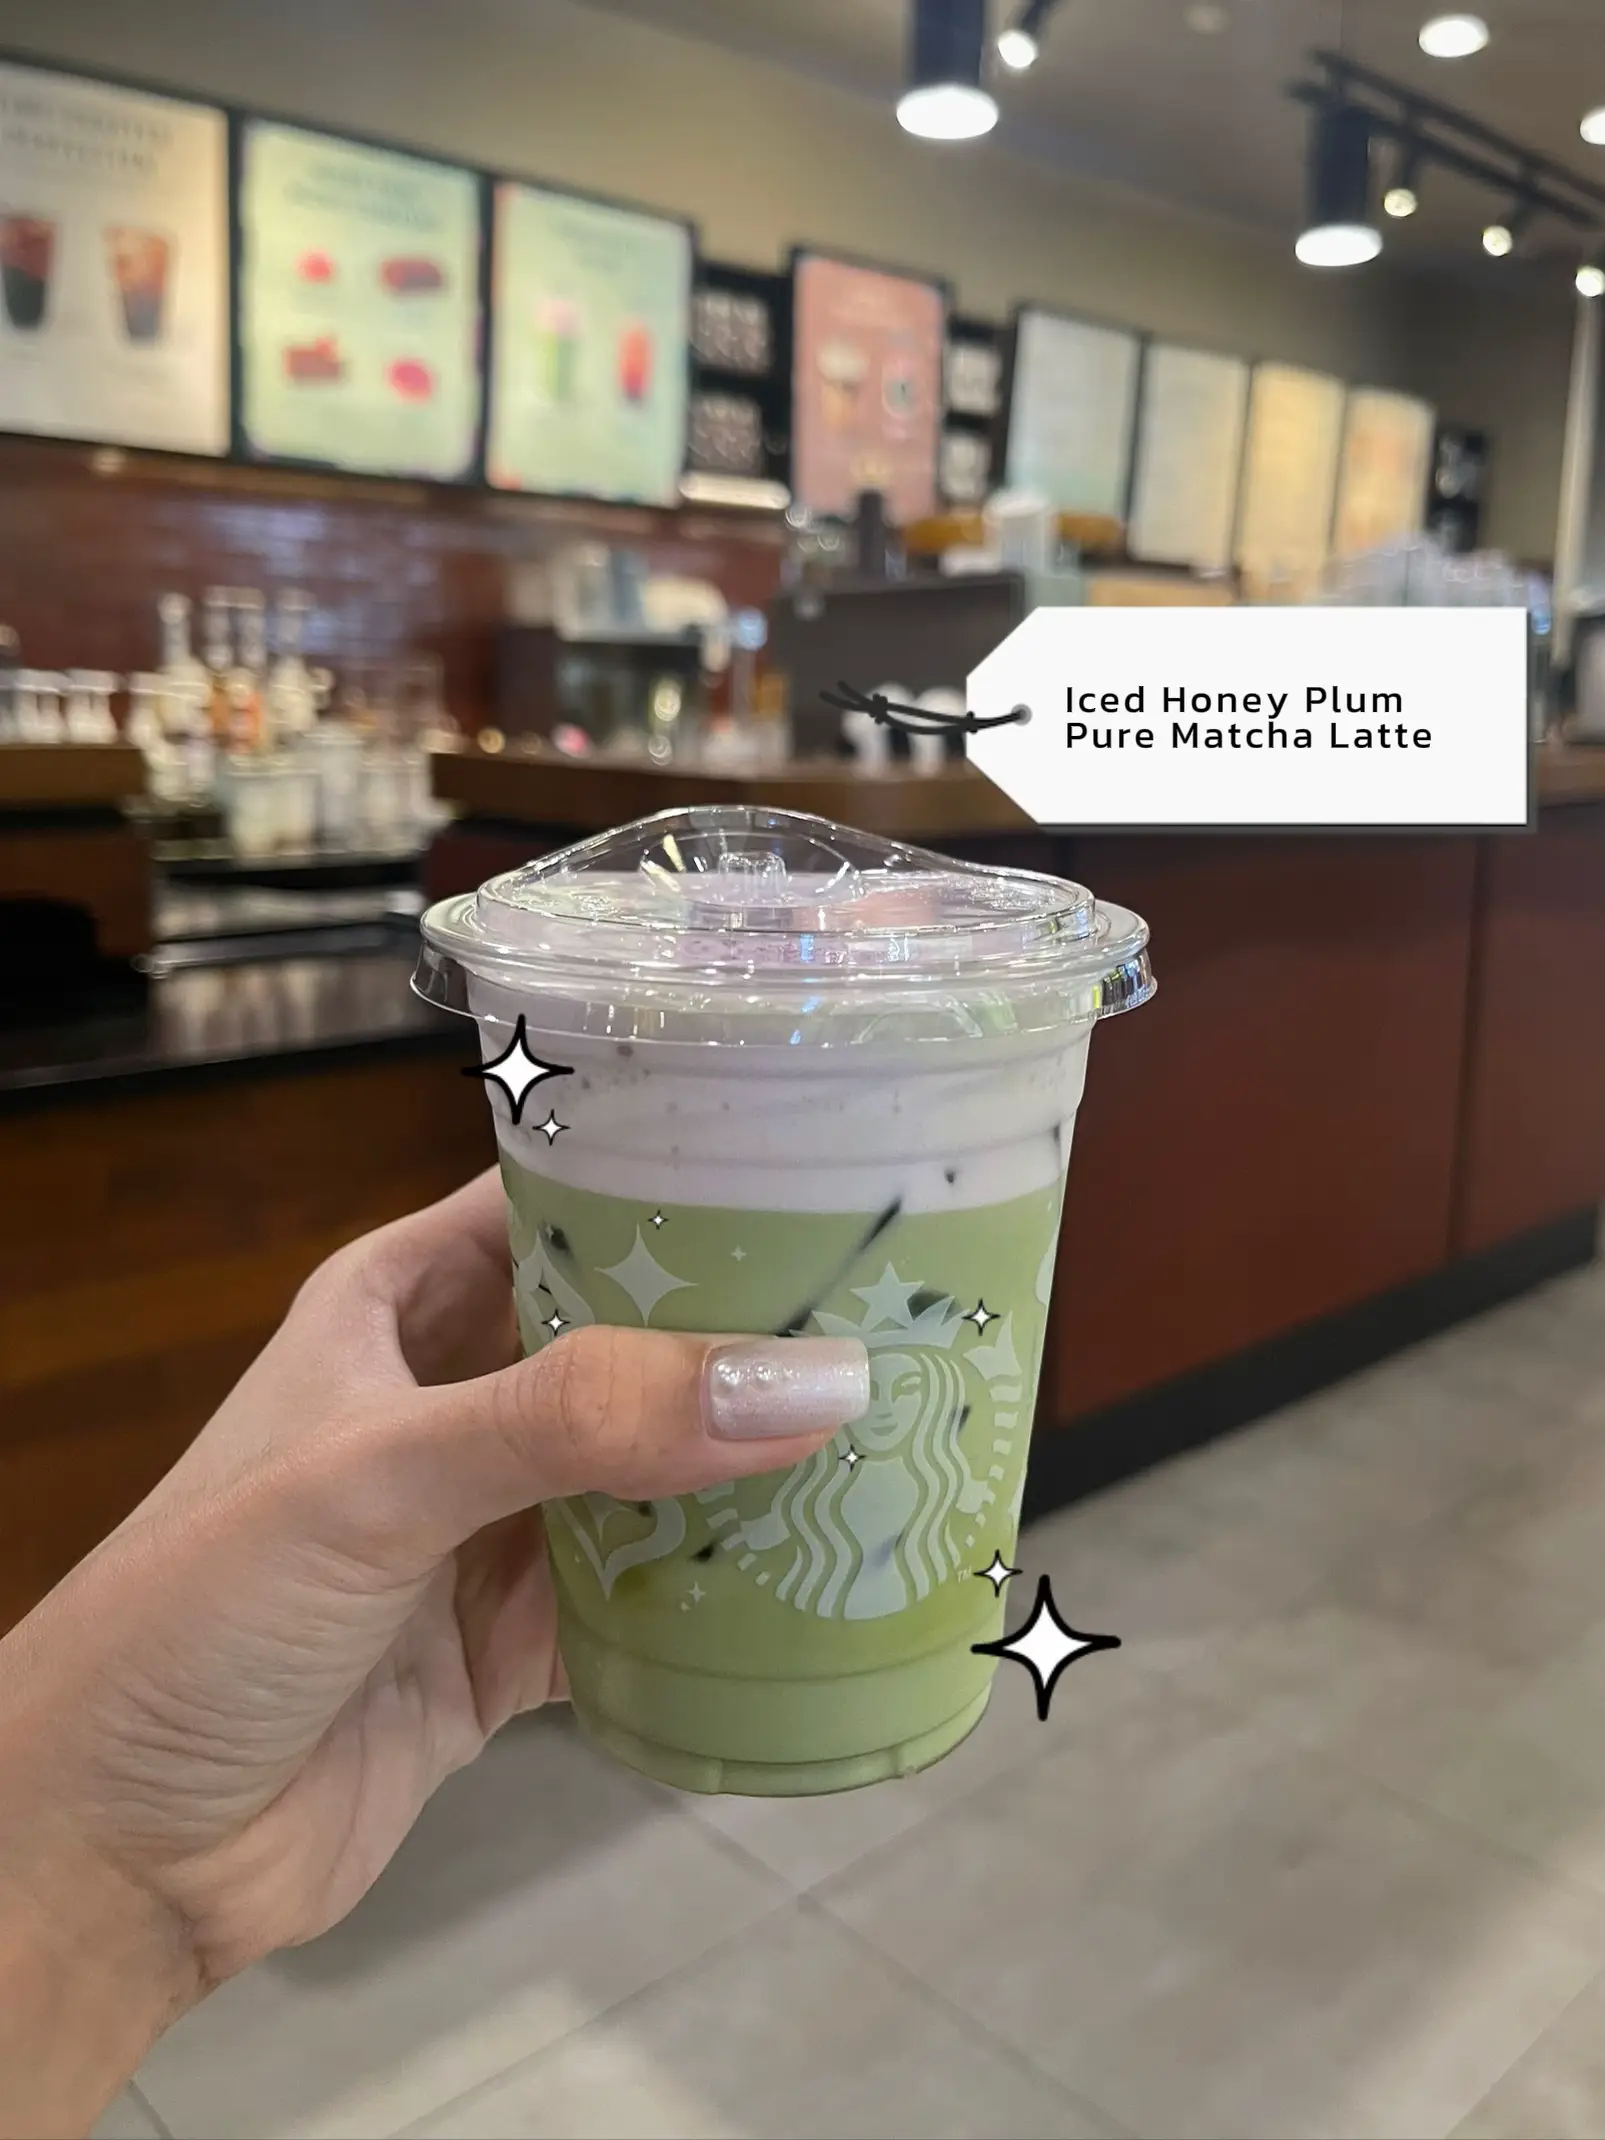 Starbucks - Iced Honey Plum Pure Matcha Latte🍵🌸 | Gallery posted by จจ ...